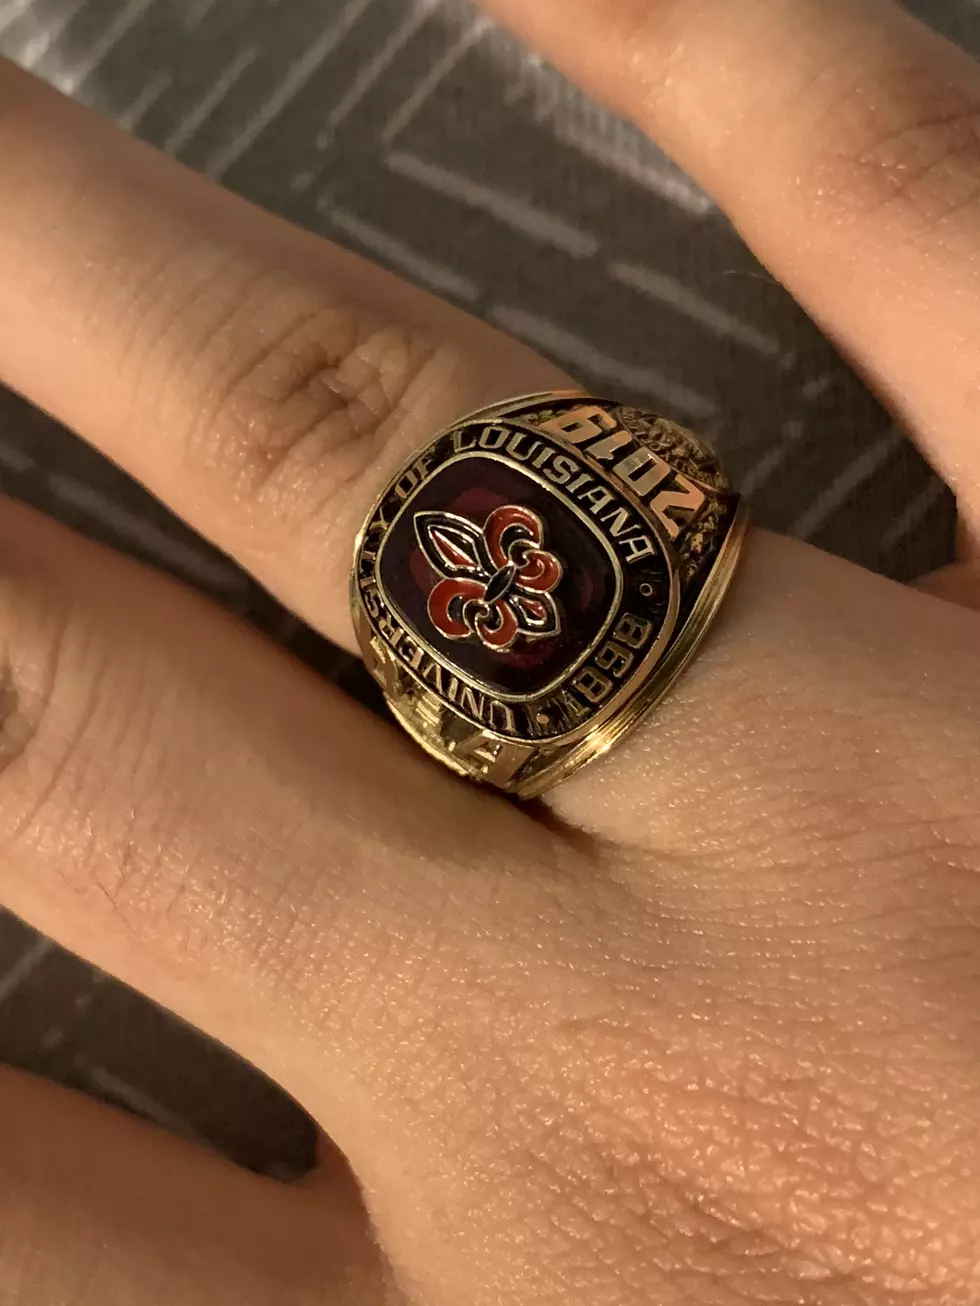 UL Class Rings May Mean More Than You Think